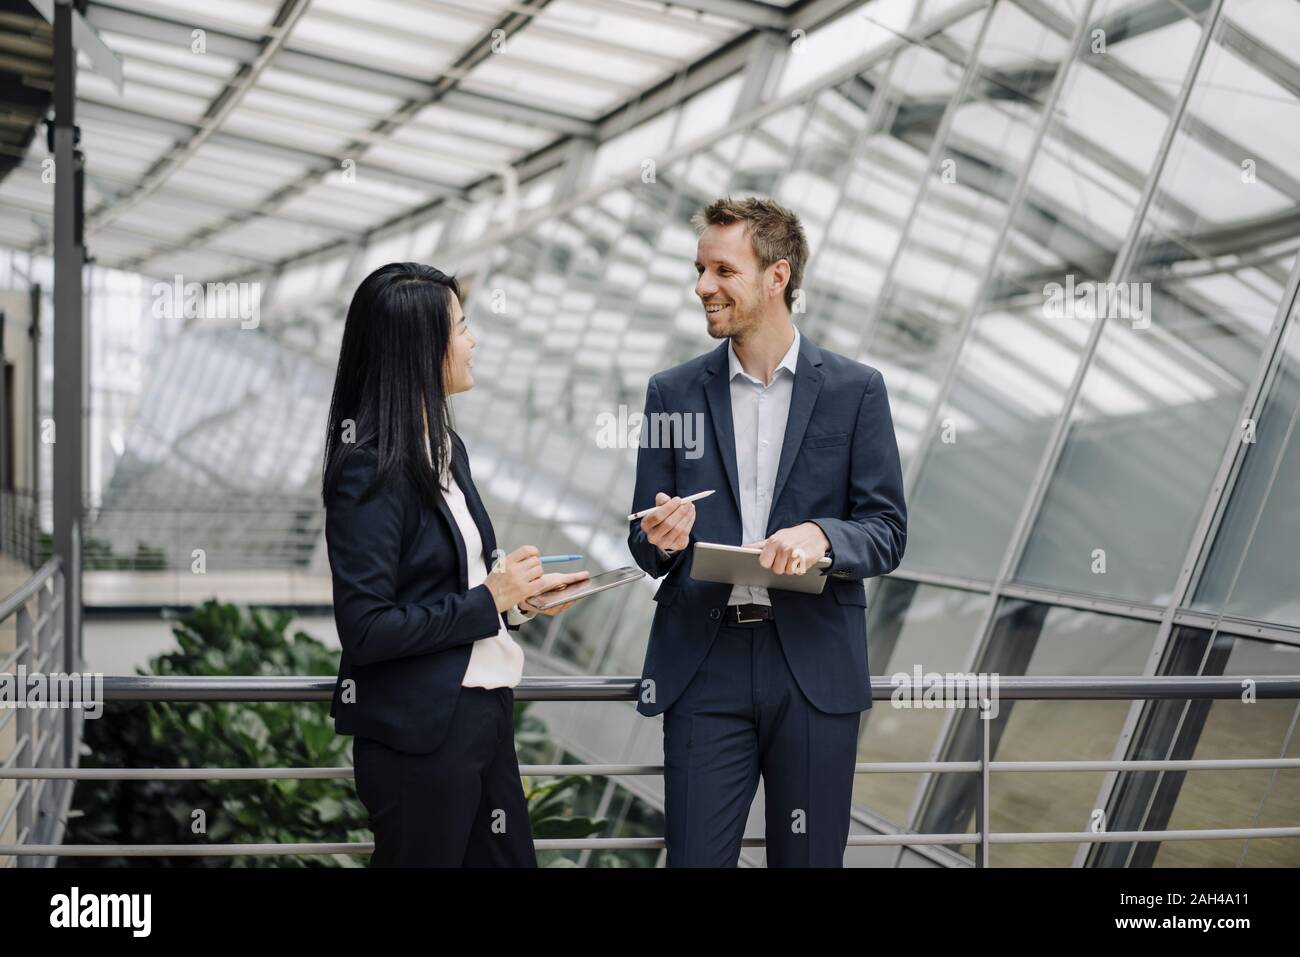 Smiling businessman and businesswoman with tablets talking in modern office building Stock Photo